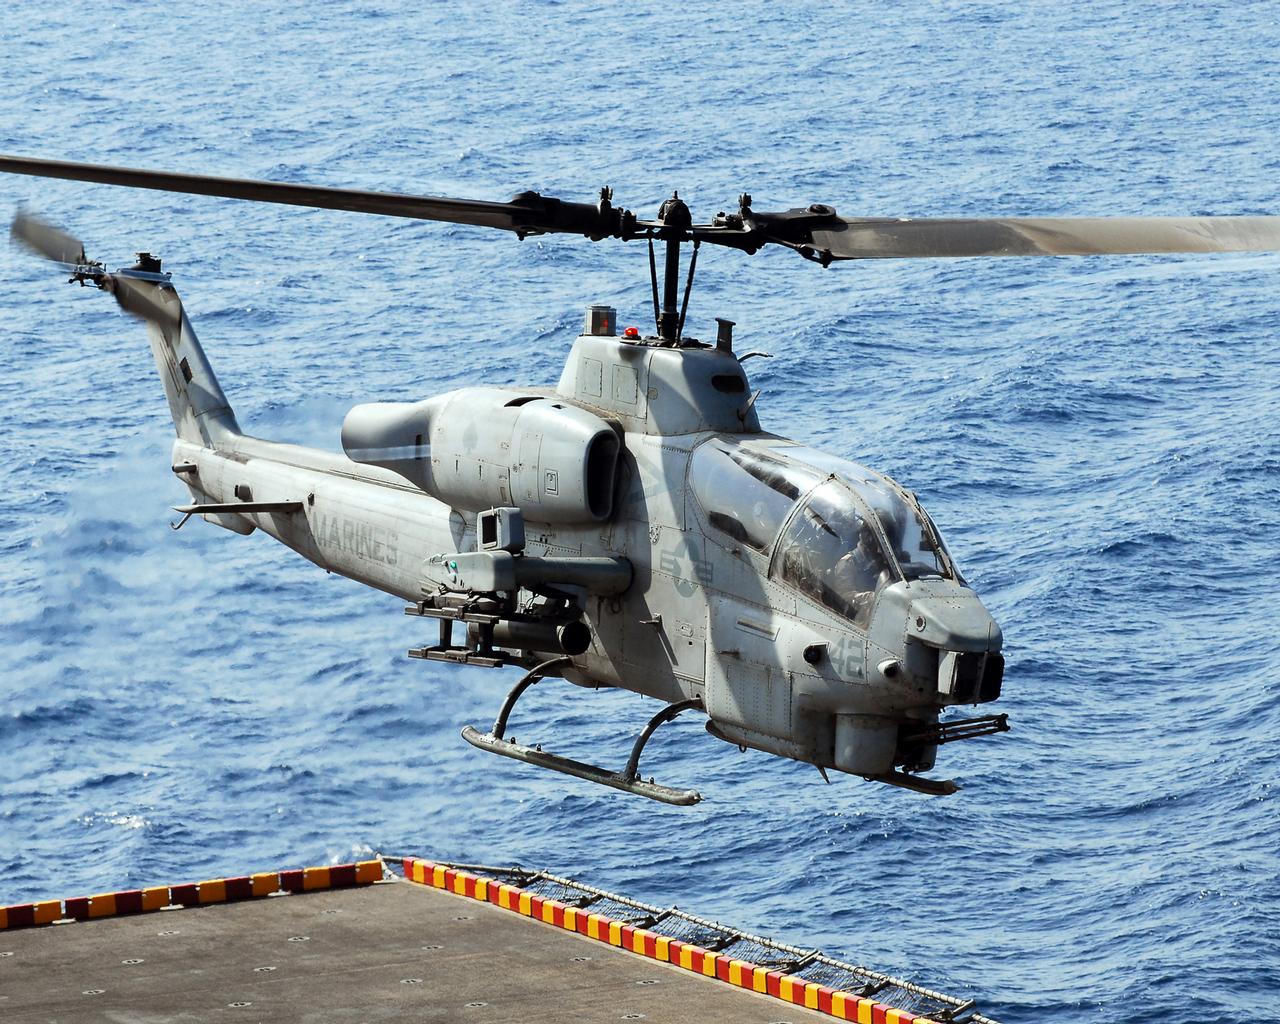 Download High quality marines Helicopter wallpaper / 1280x1024